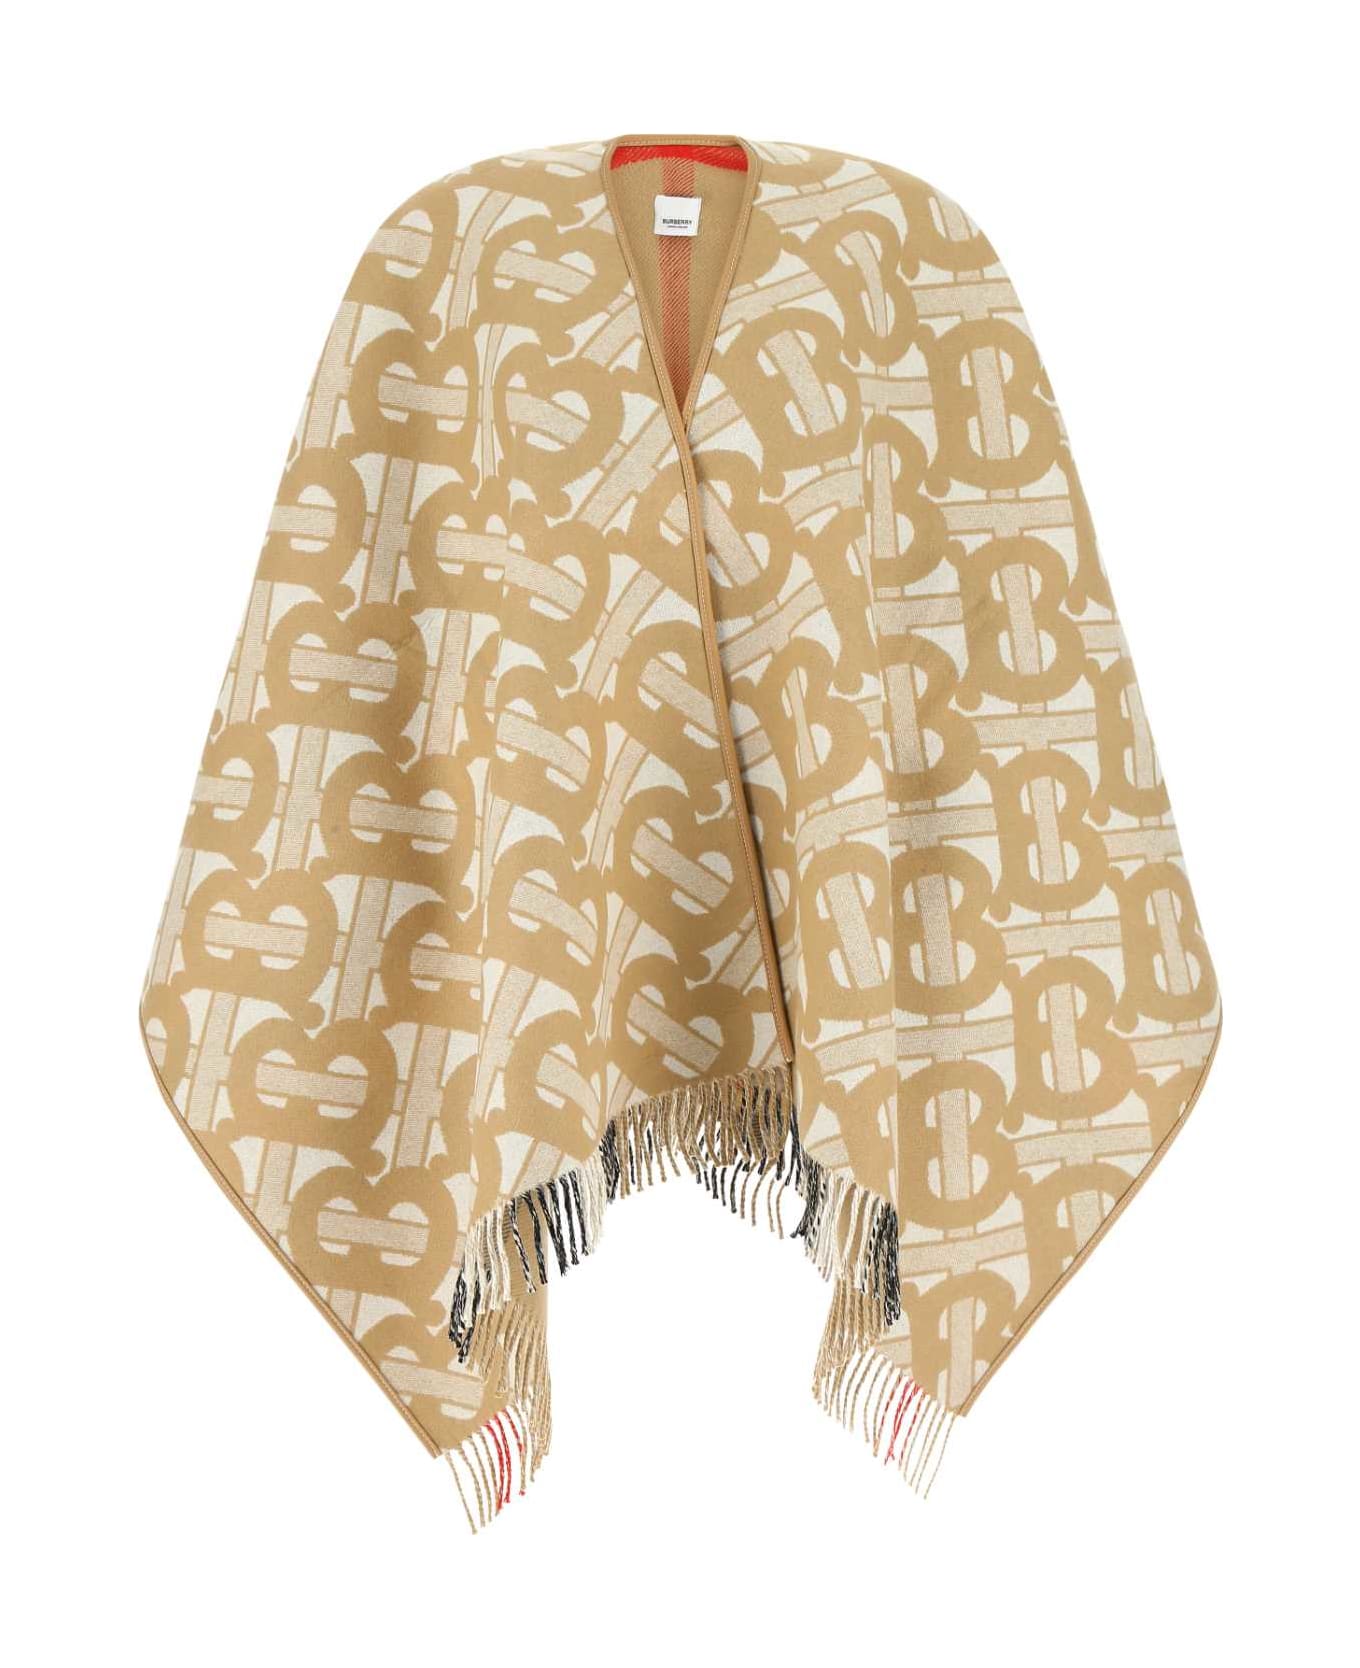 Burberry Embroidered Wool Blend Cape - A7026 コート